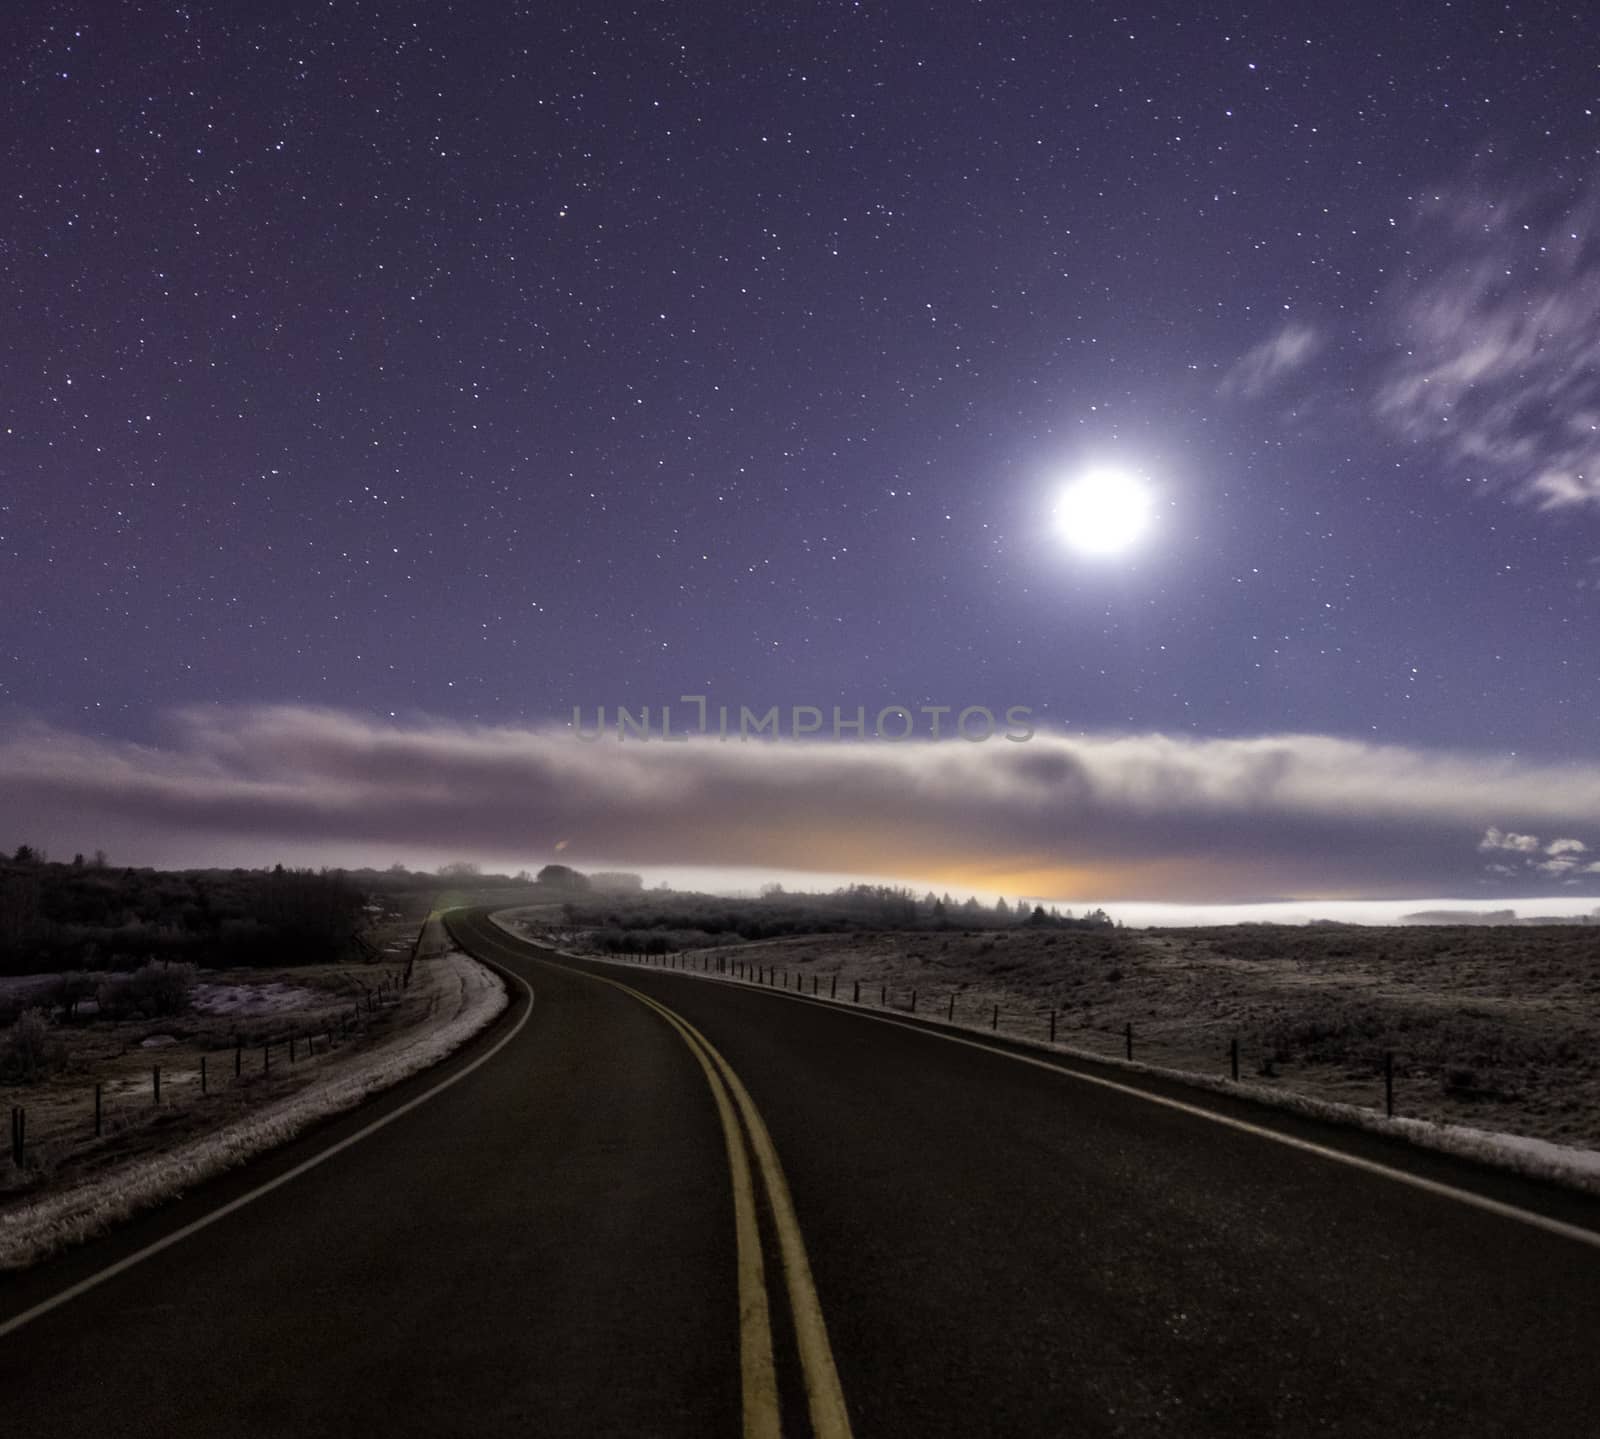 Curved road lit up by the moon by TSLPhoto